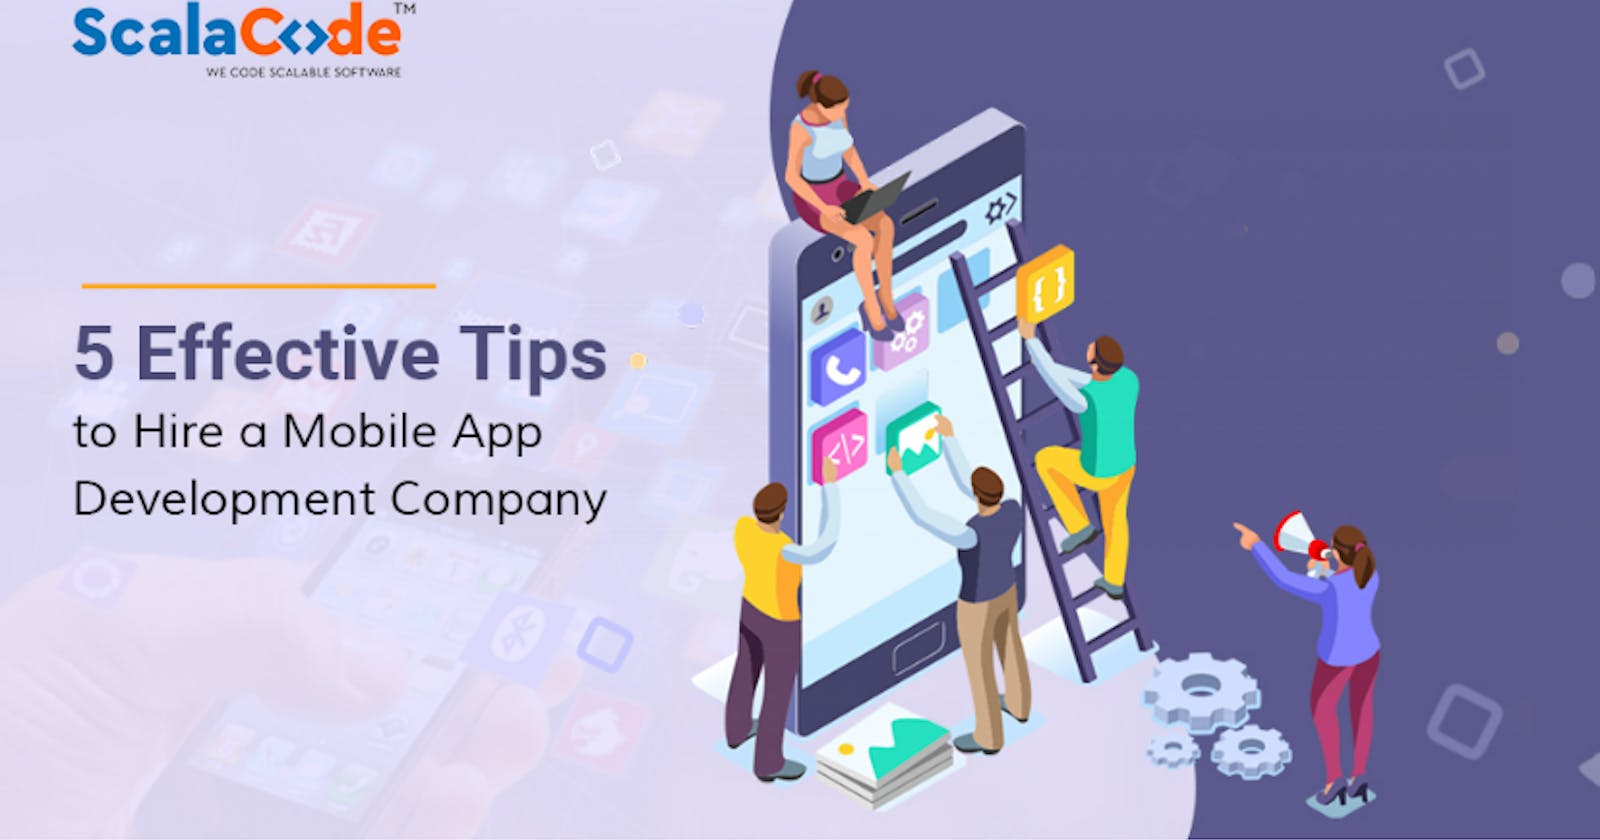 5 Effective Tips to Hire a Mobile App Development Company